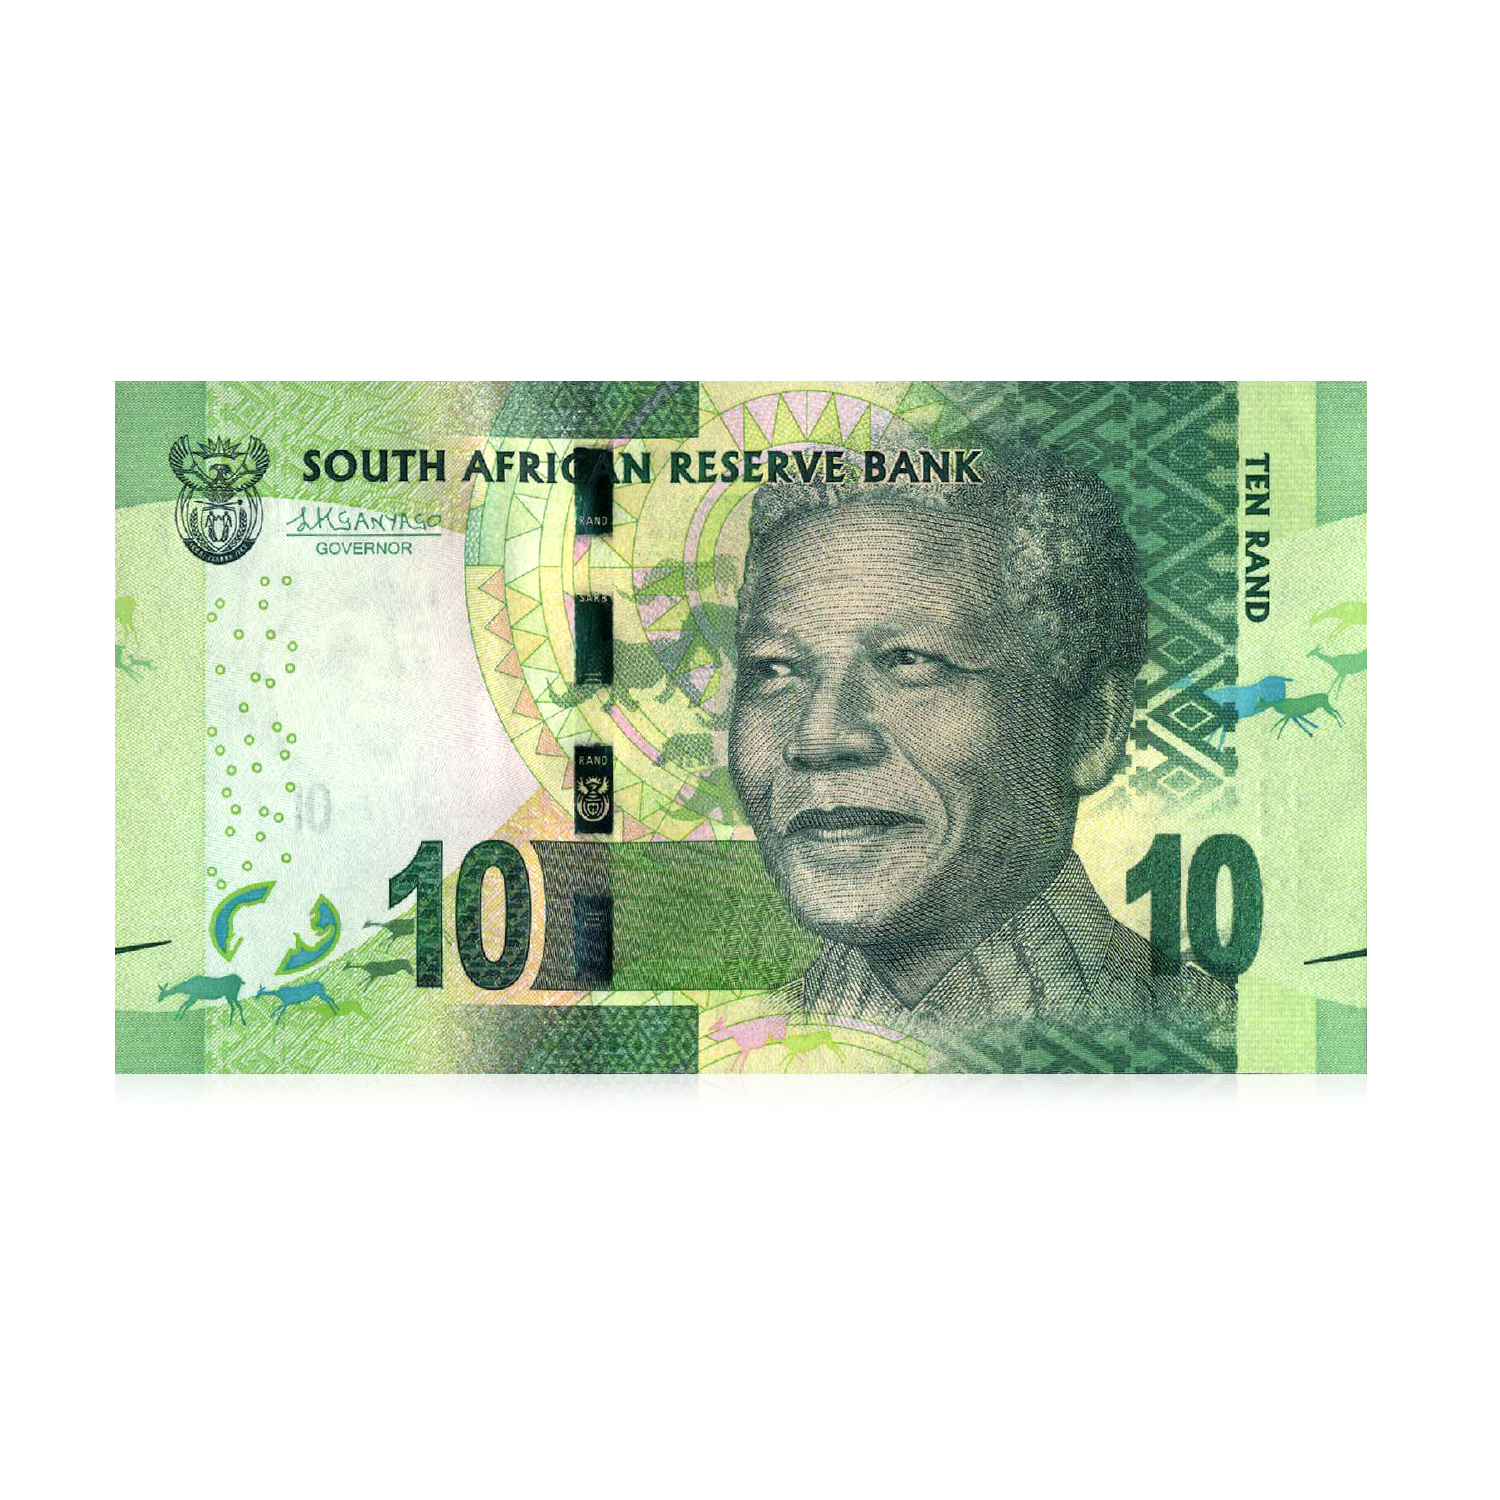 Nelson Mandela South Africa Coin & Note Set